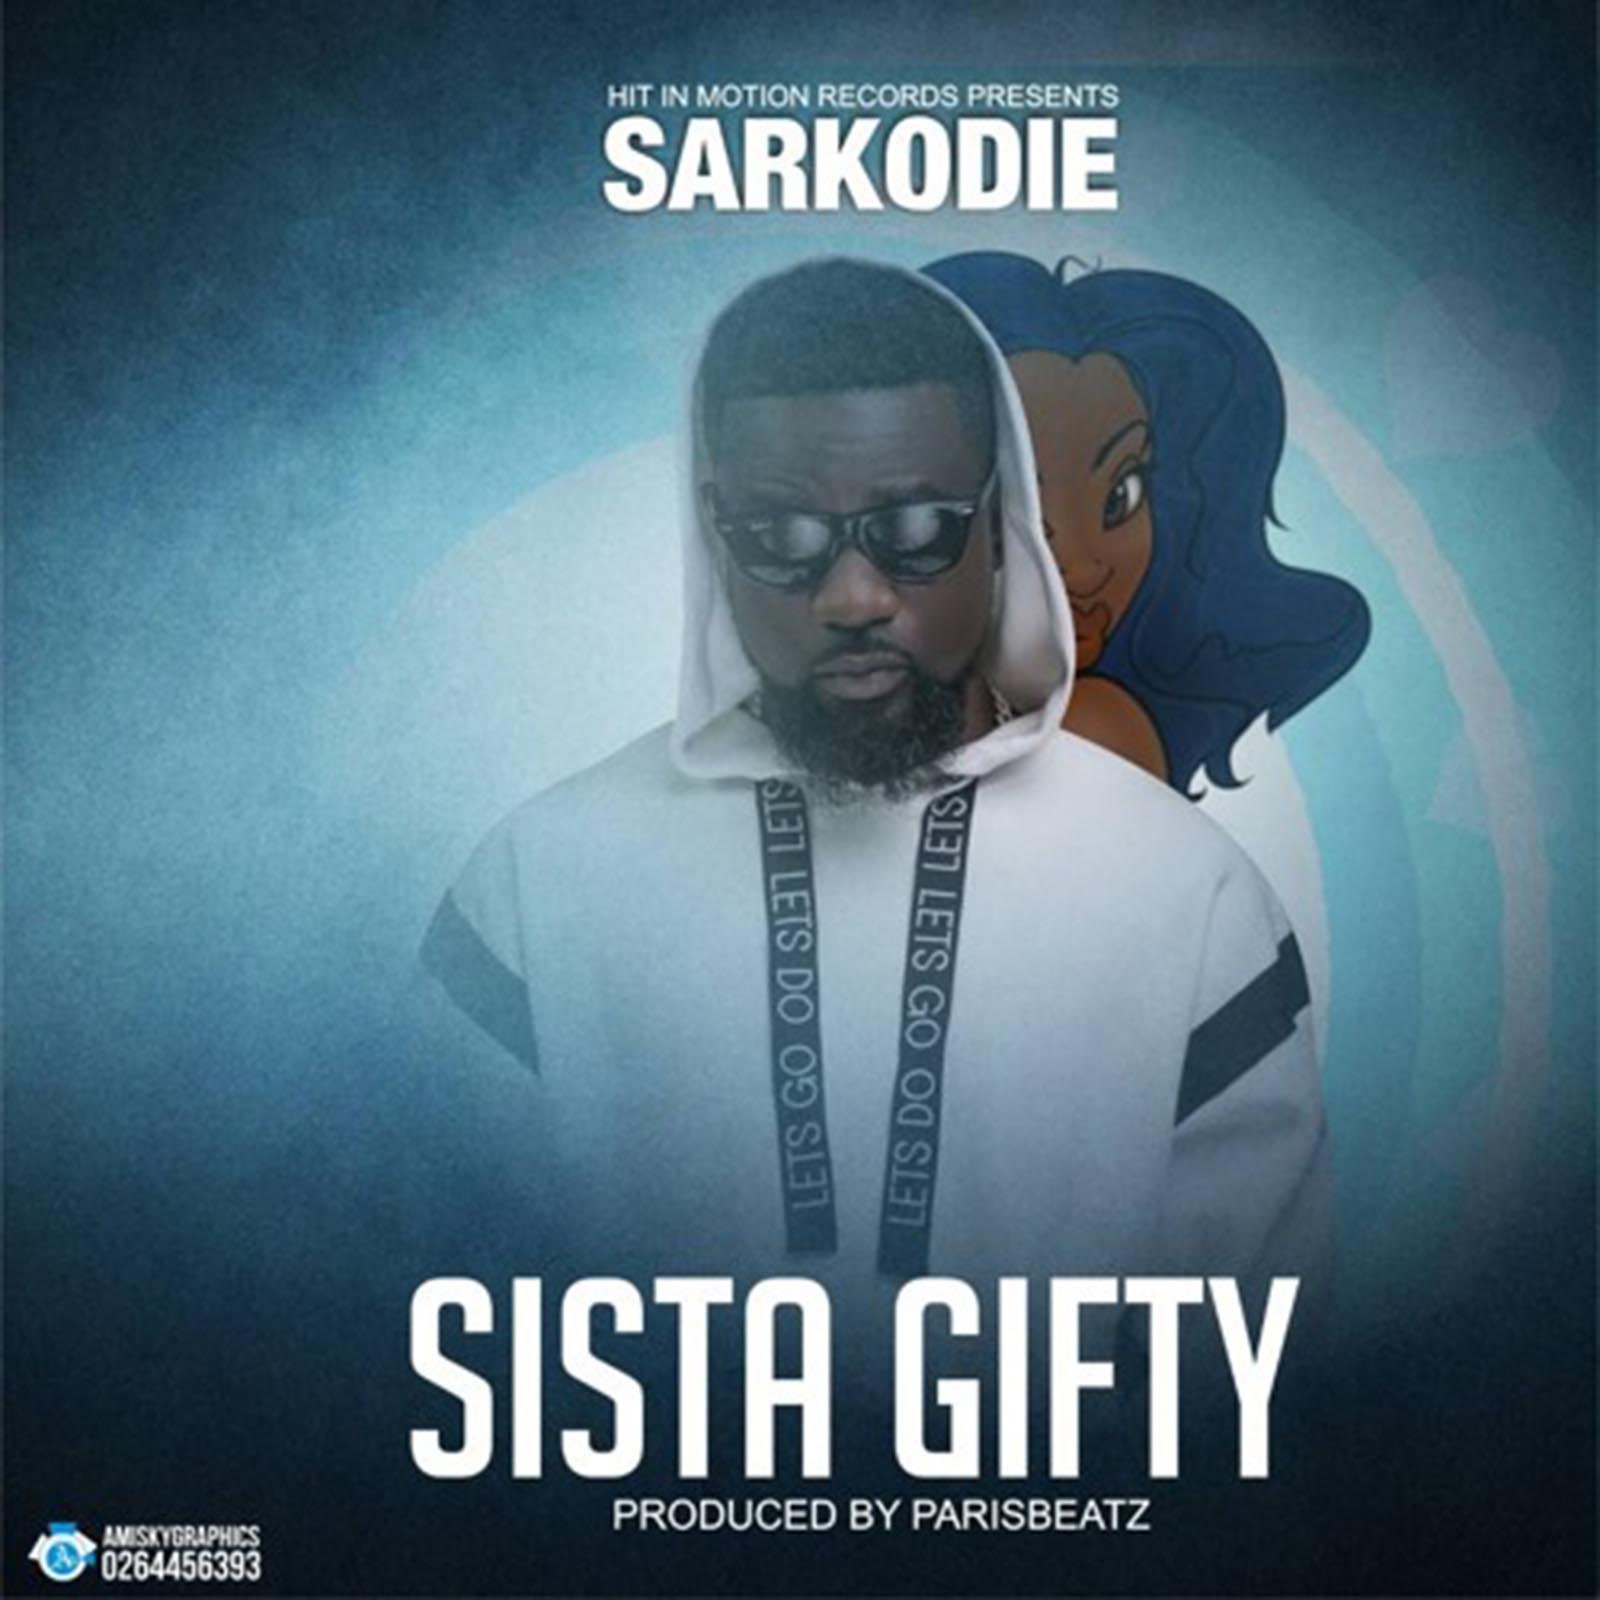 Sista Gifty by Sarkodie